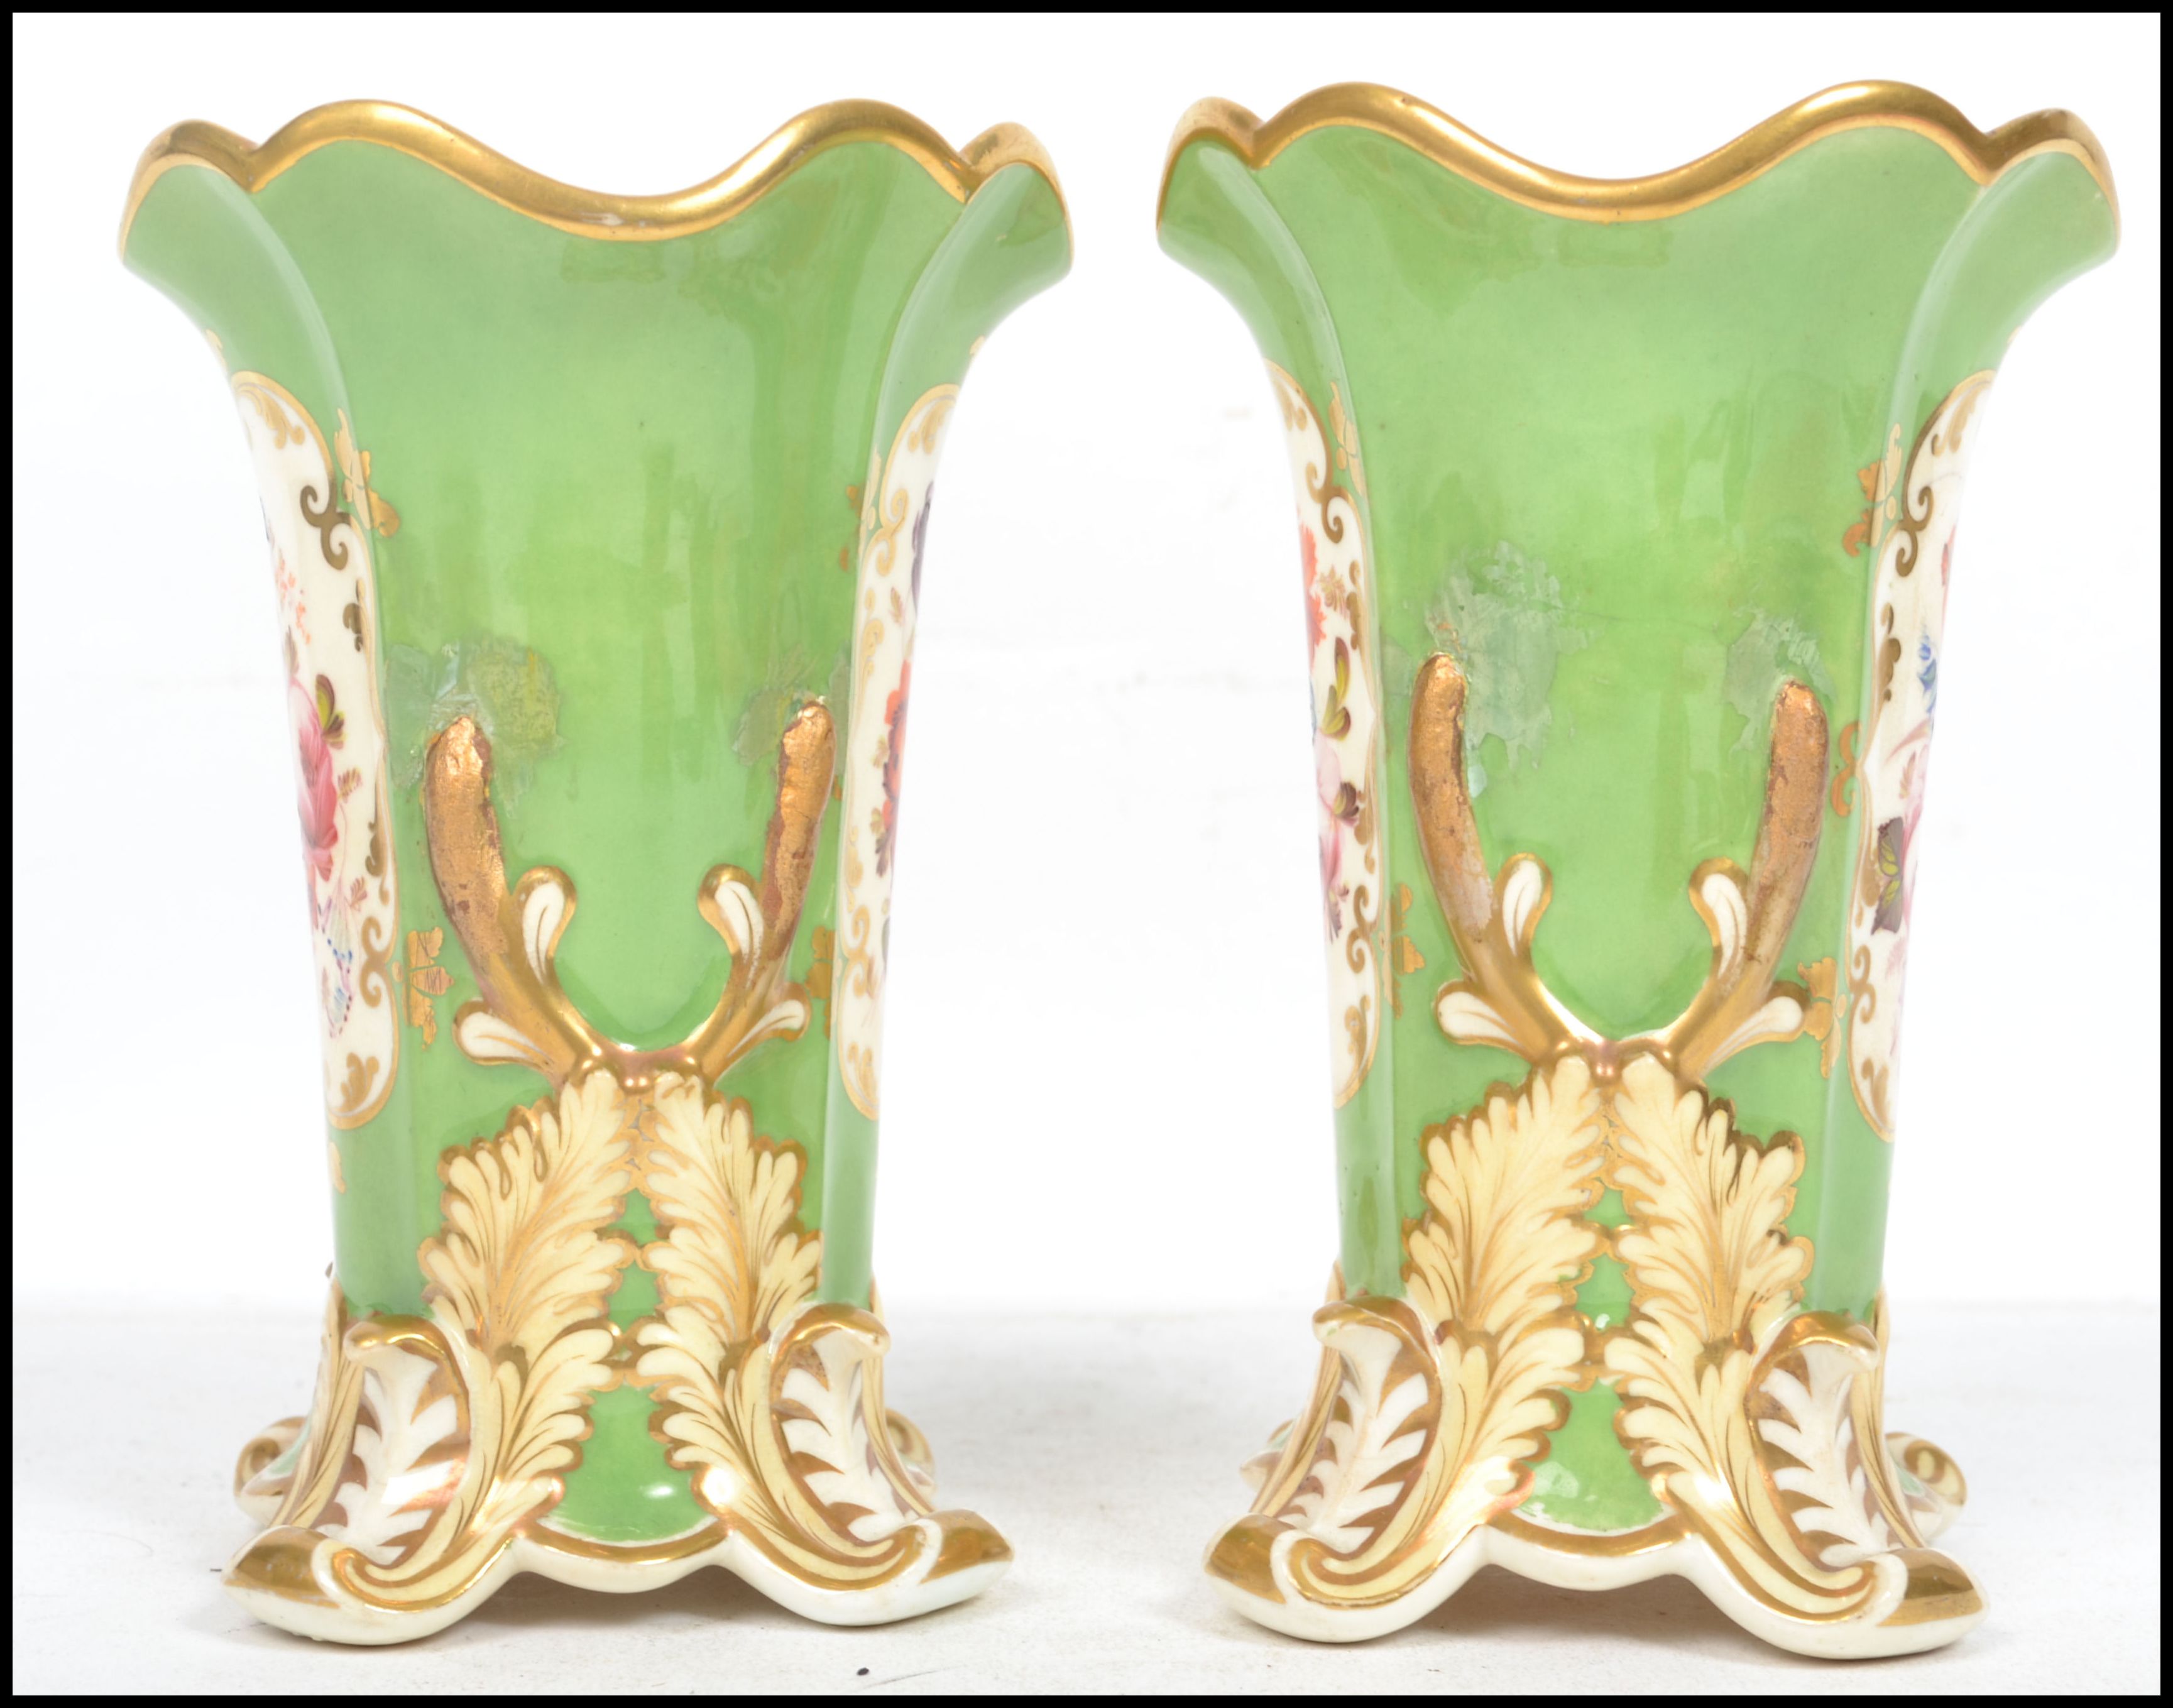 A pair of 19th century English factory vases havin - Image 2 of 6